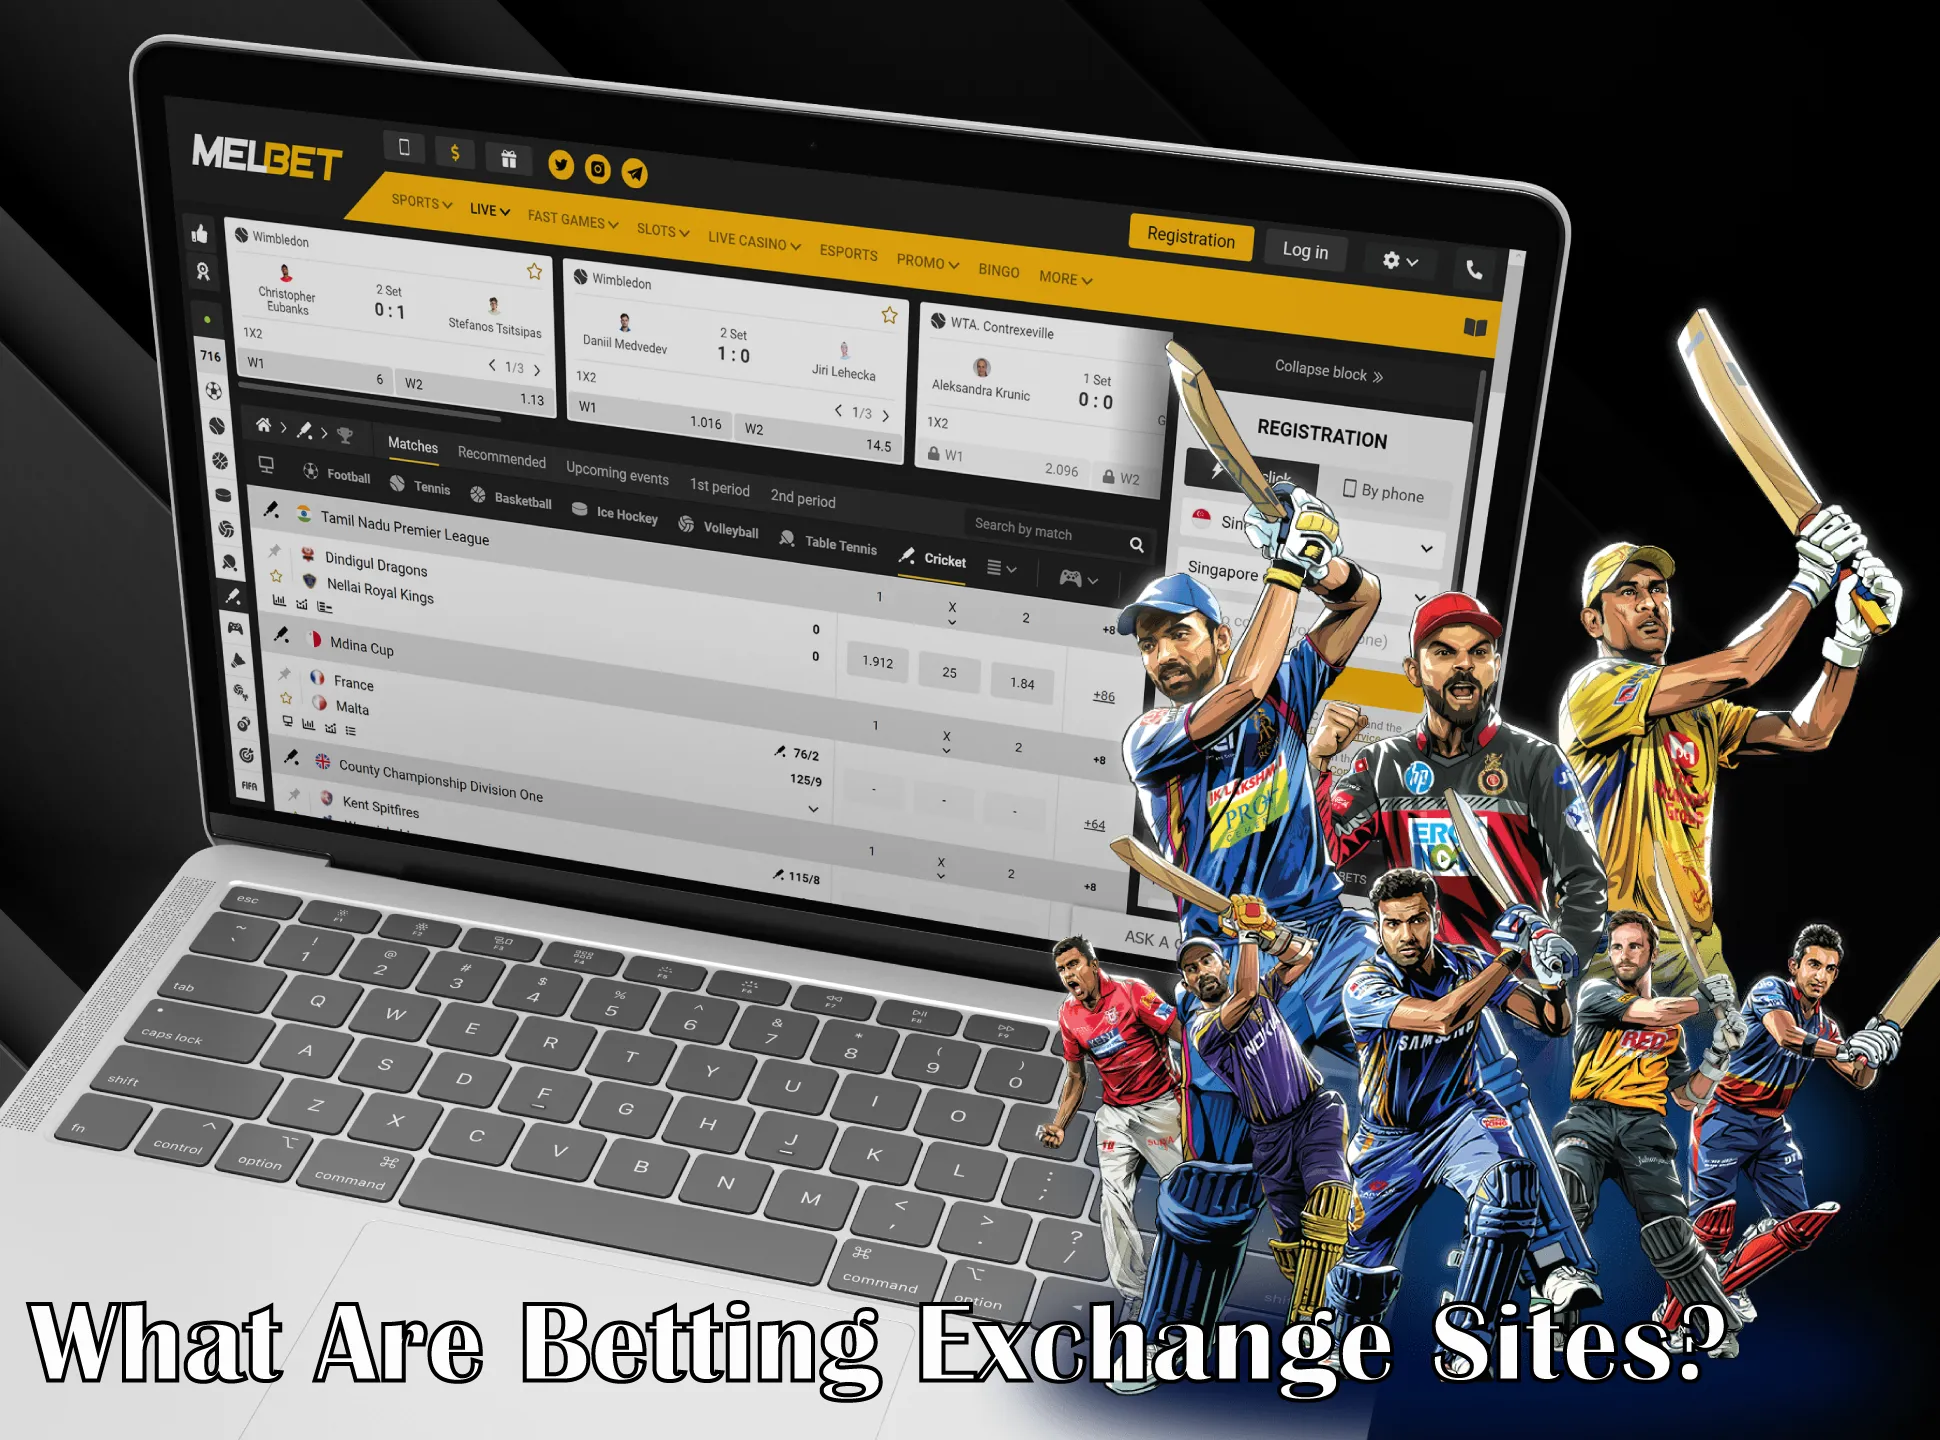 Learn more what are cricket betting exchange sites is.